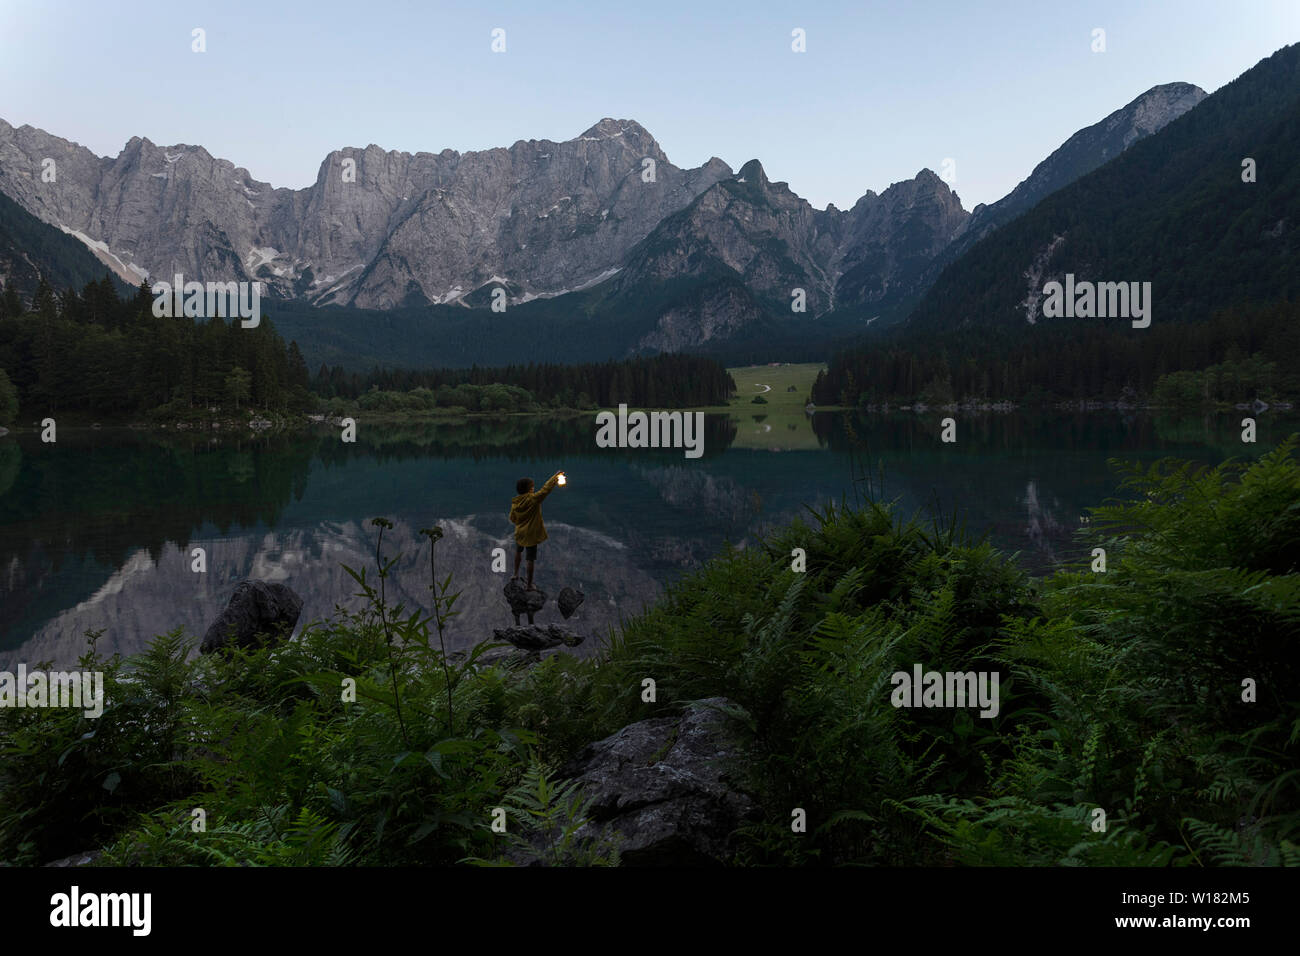 Boy in yellow rain jacket standing on the rock and holding a luminous hand lantern at scenic summer lake landscape in twilight, Laghi di Fusine, Italy Stock Photo